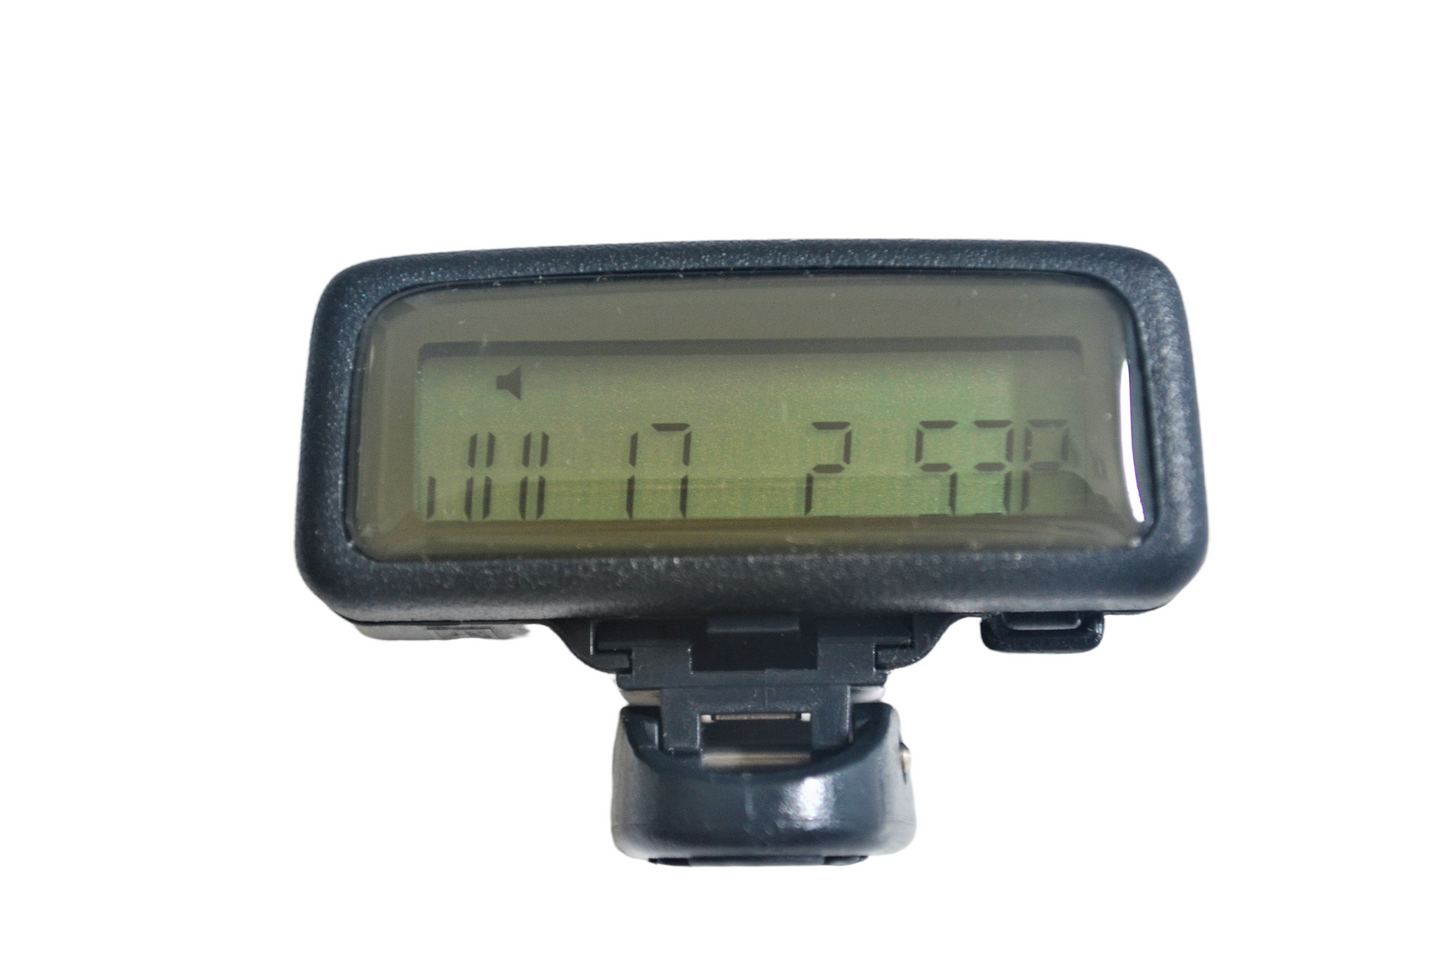 Daviscomms Br501rf 1-Way Numeric Pager (refurbished) with Monthly Prepaid Service